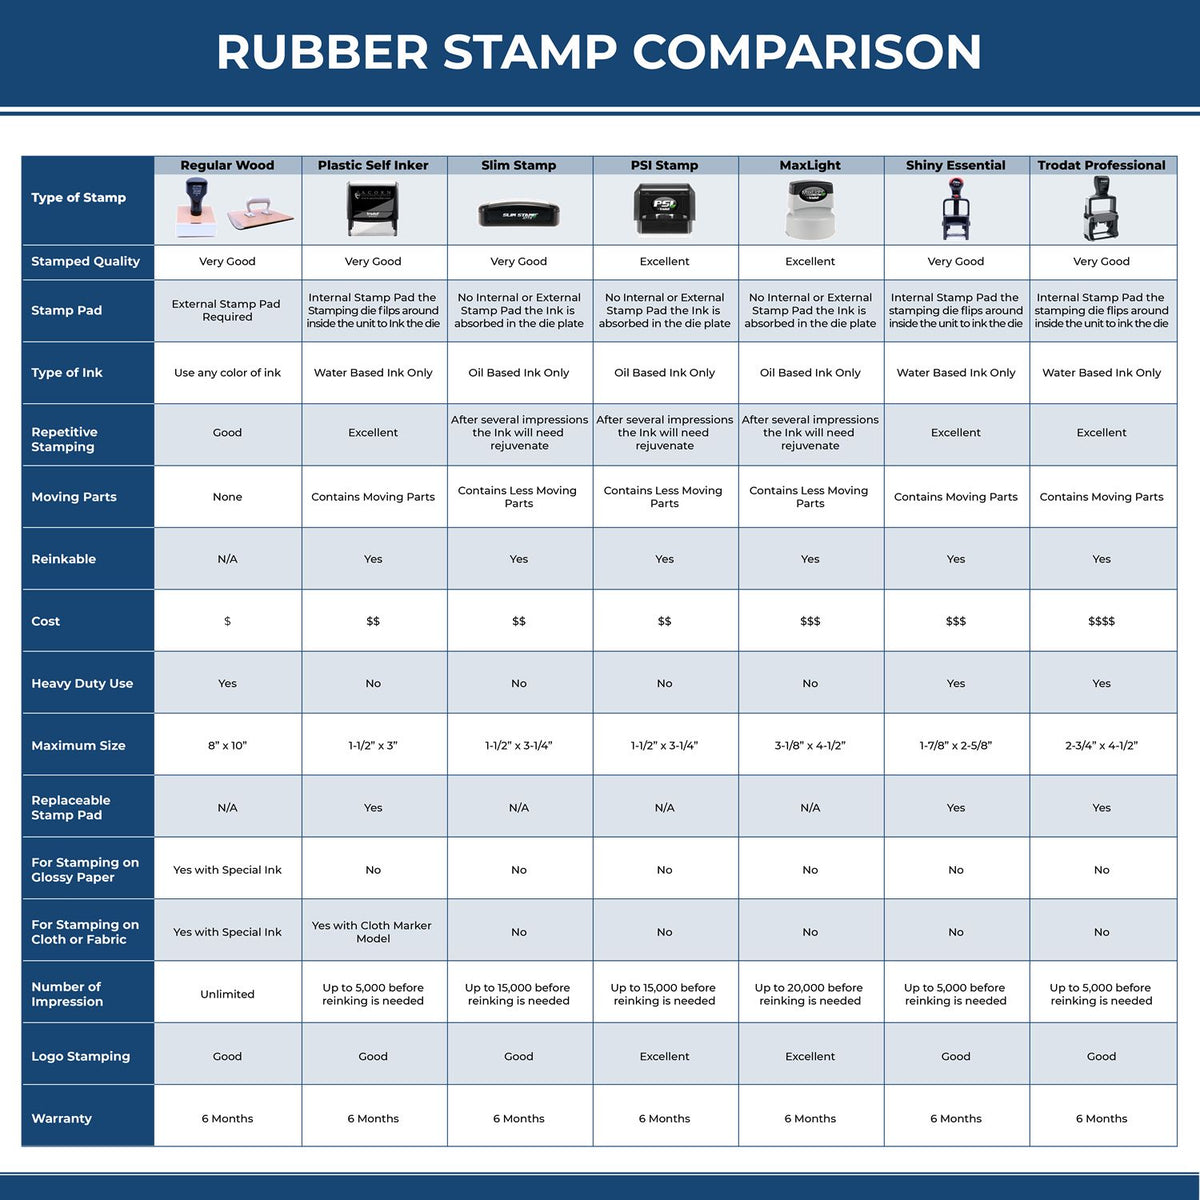 Large Letter Post Economy Rubber Stamp 4937R Rubber Stamp Comparison